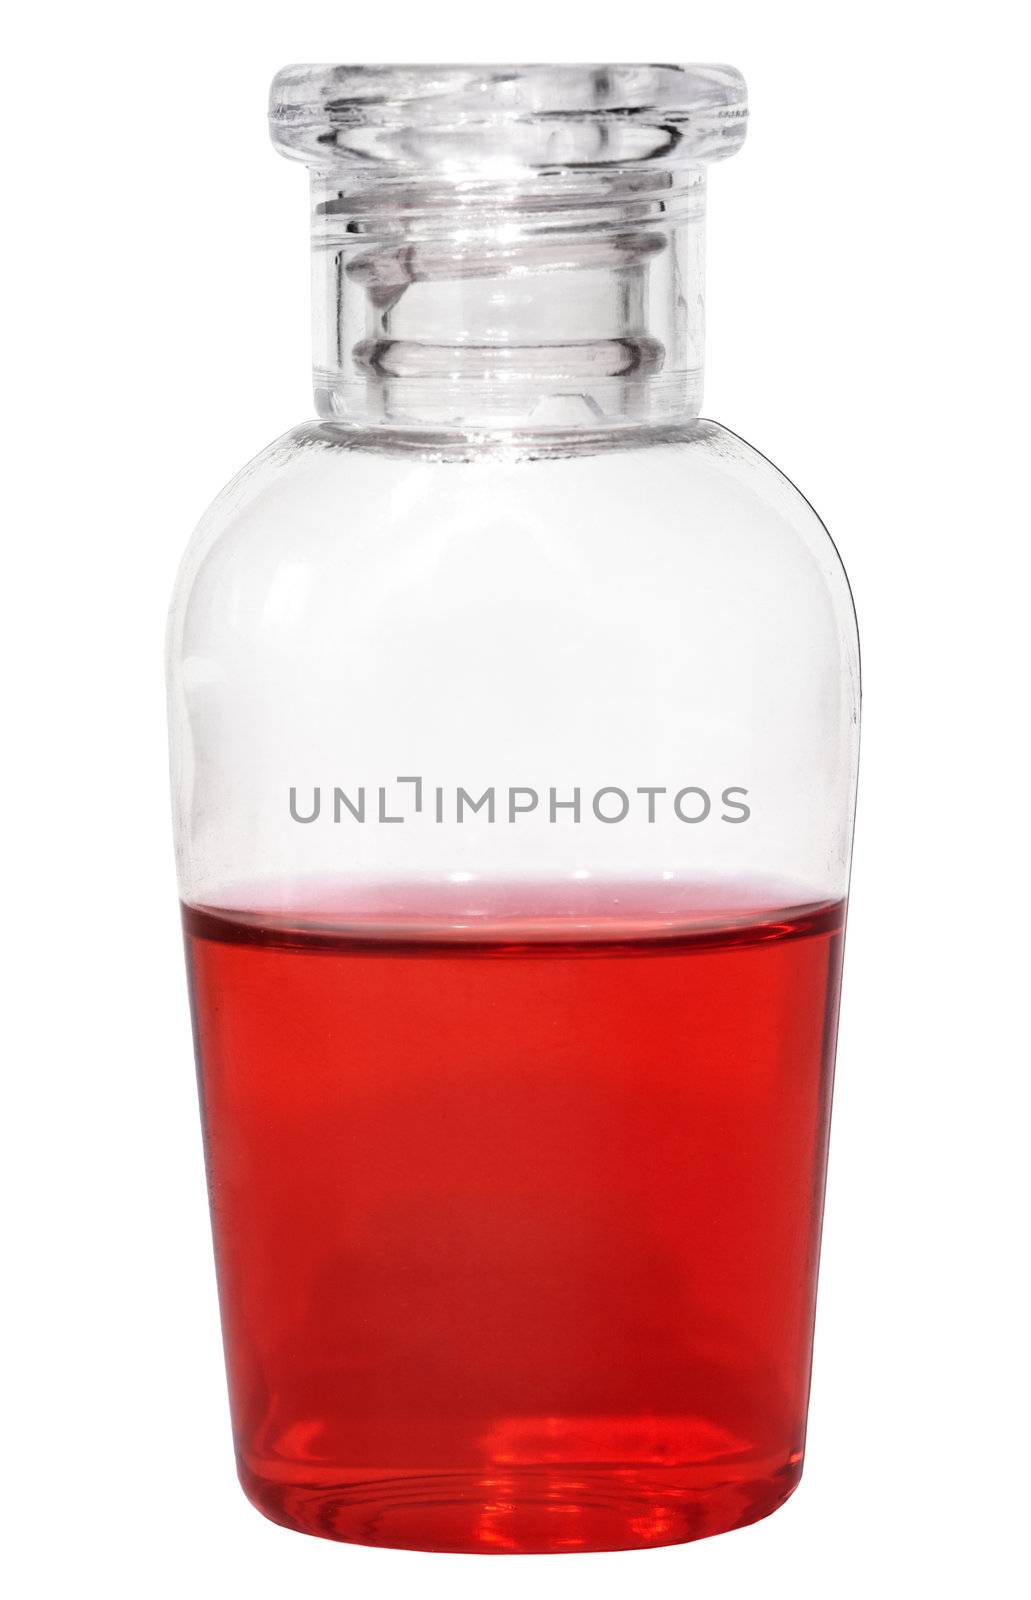 Small vial of red liquid isolated on white background